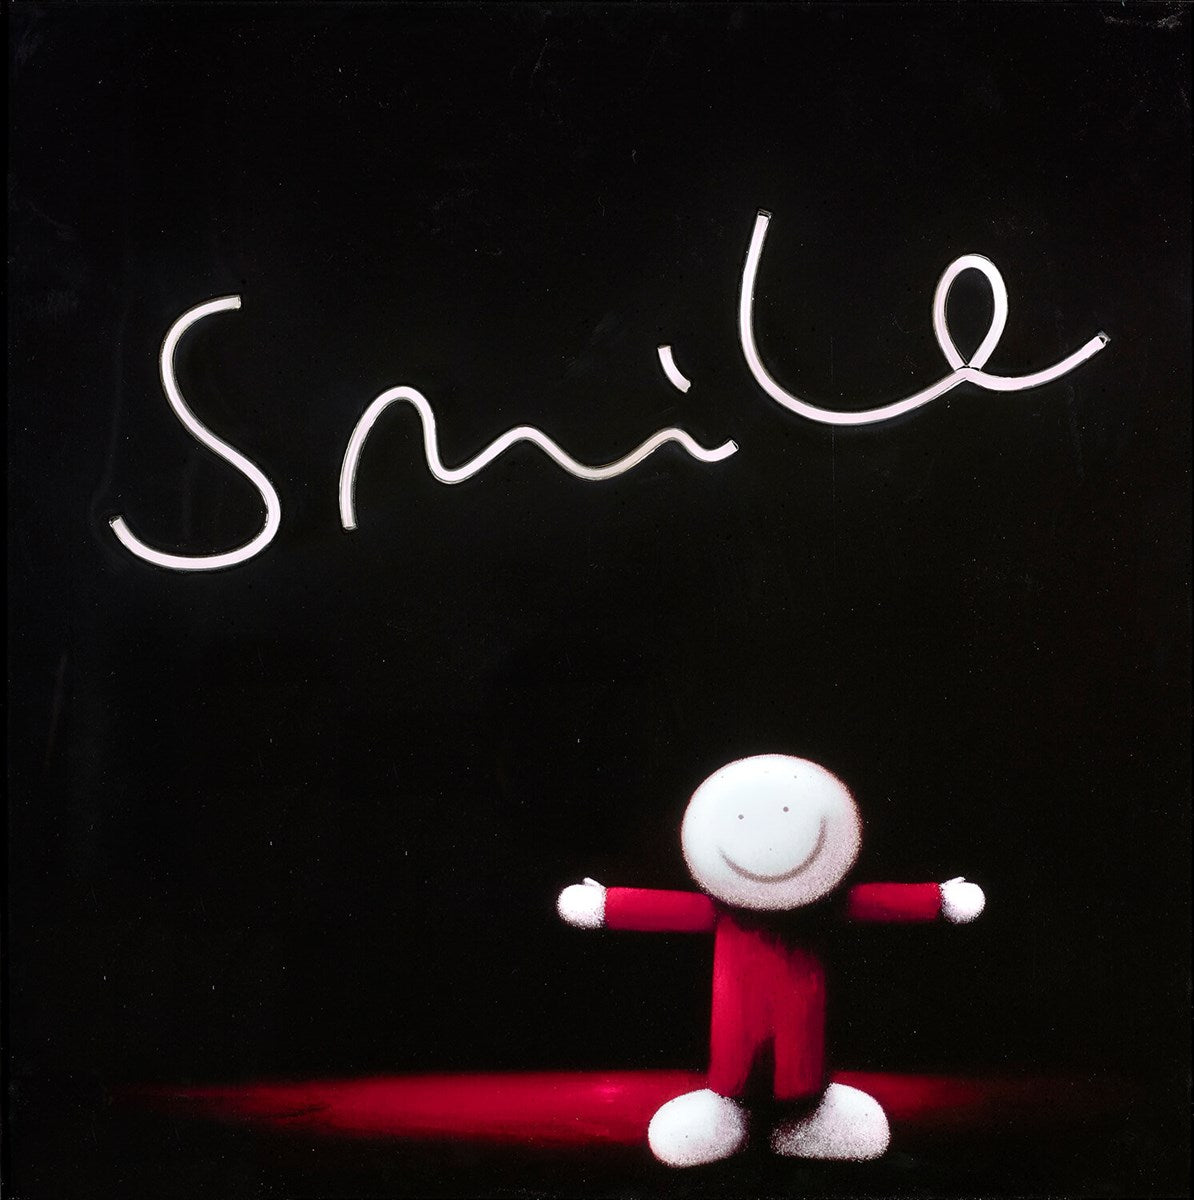 Keep Smiling limited edition framed print by Doug Hyde